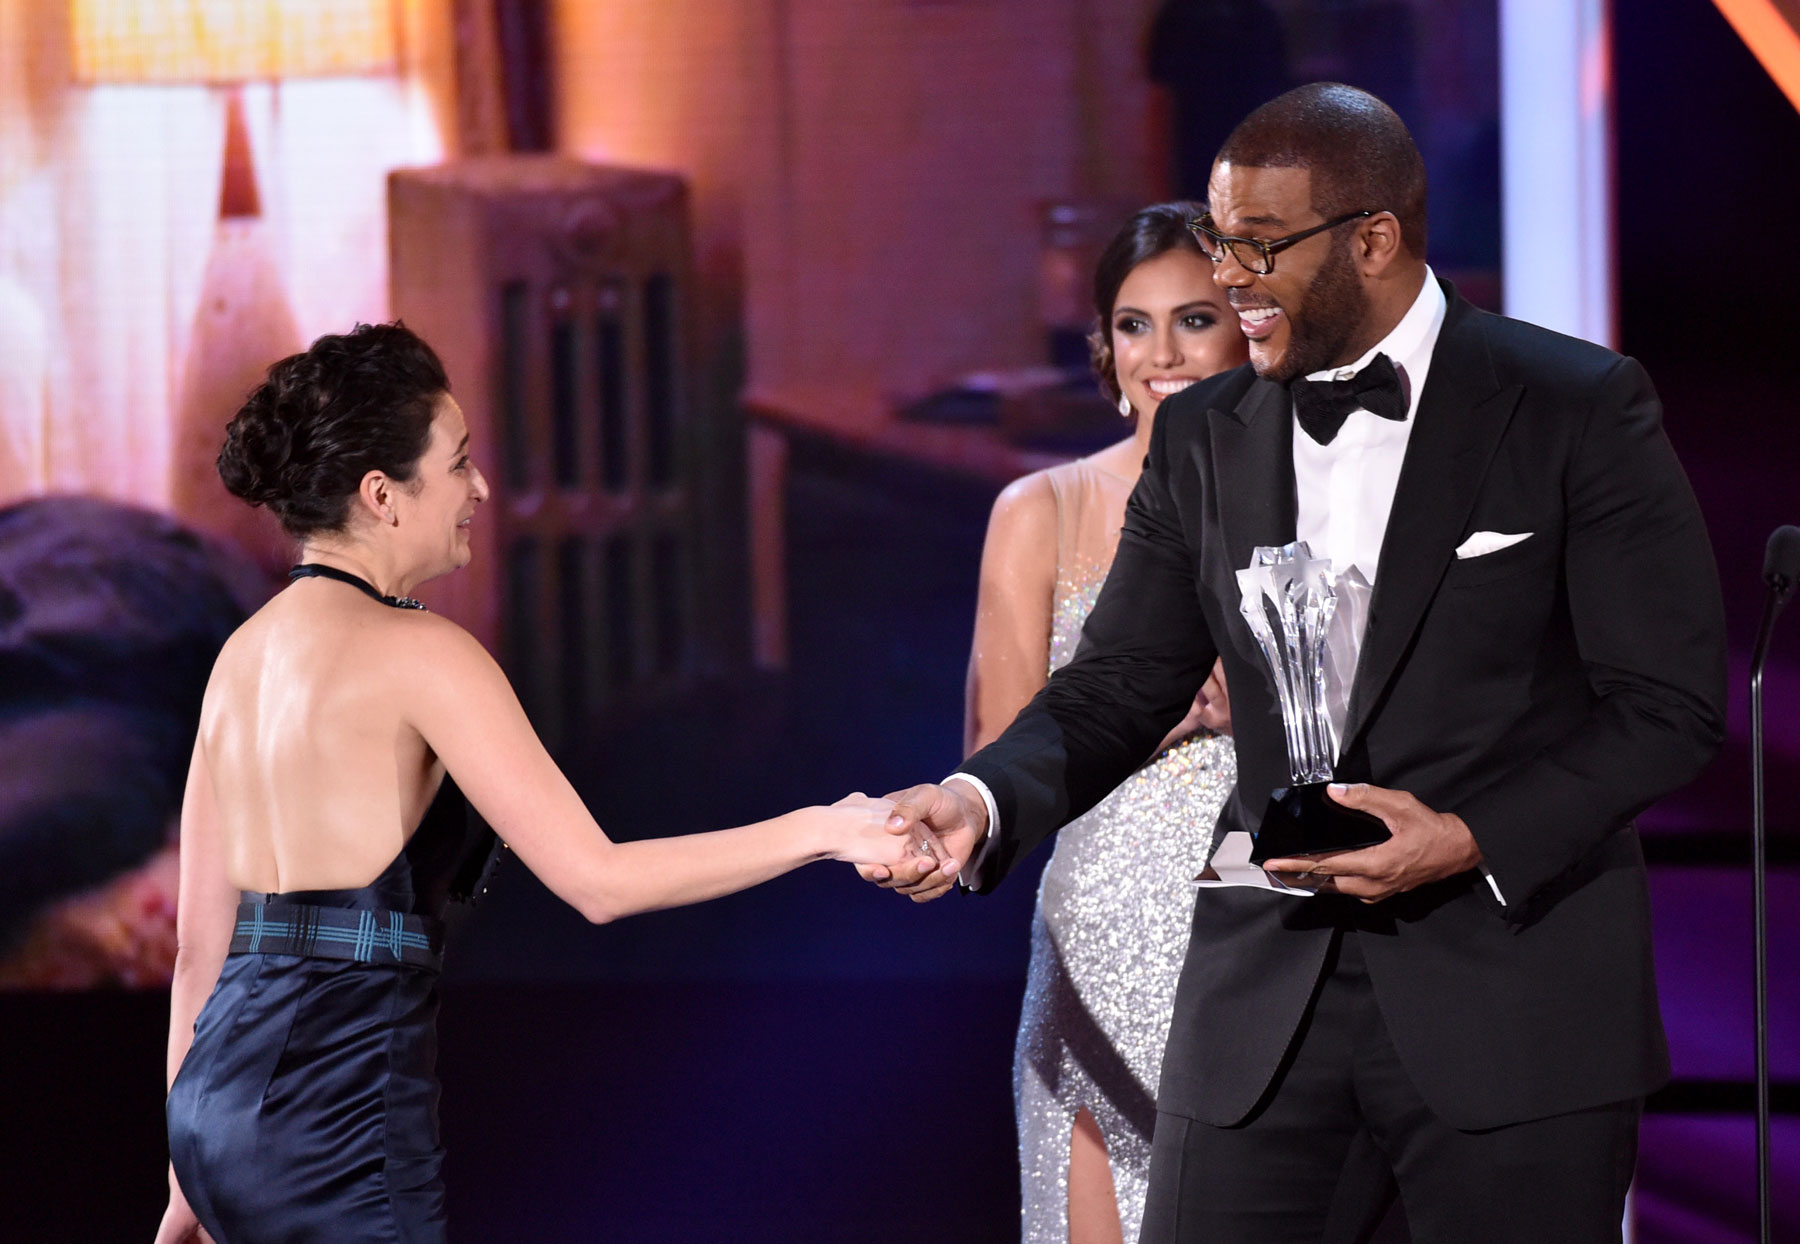 

Tyler Perry, right, presents Jenny Slate with the best actress in a comedy award for “Obvious Child” at the 20th annual Critics' Choice Movie Awards at the Hollywood Palladium on Thursday, Jan. 15, 2015, in Los Angeles. (Photo by John Shearer/Invision/AP)